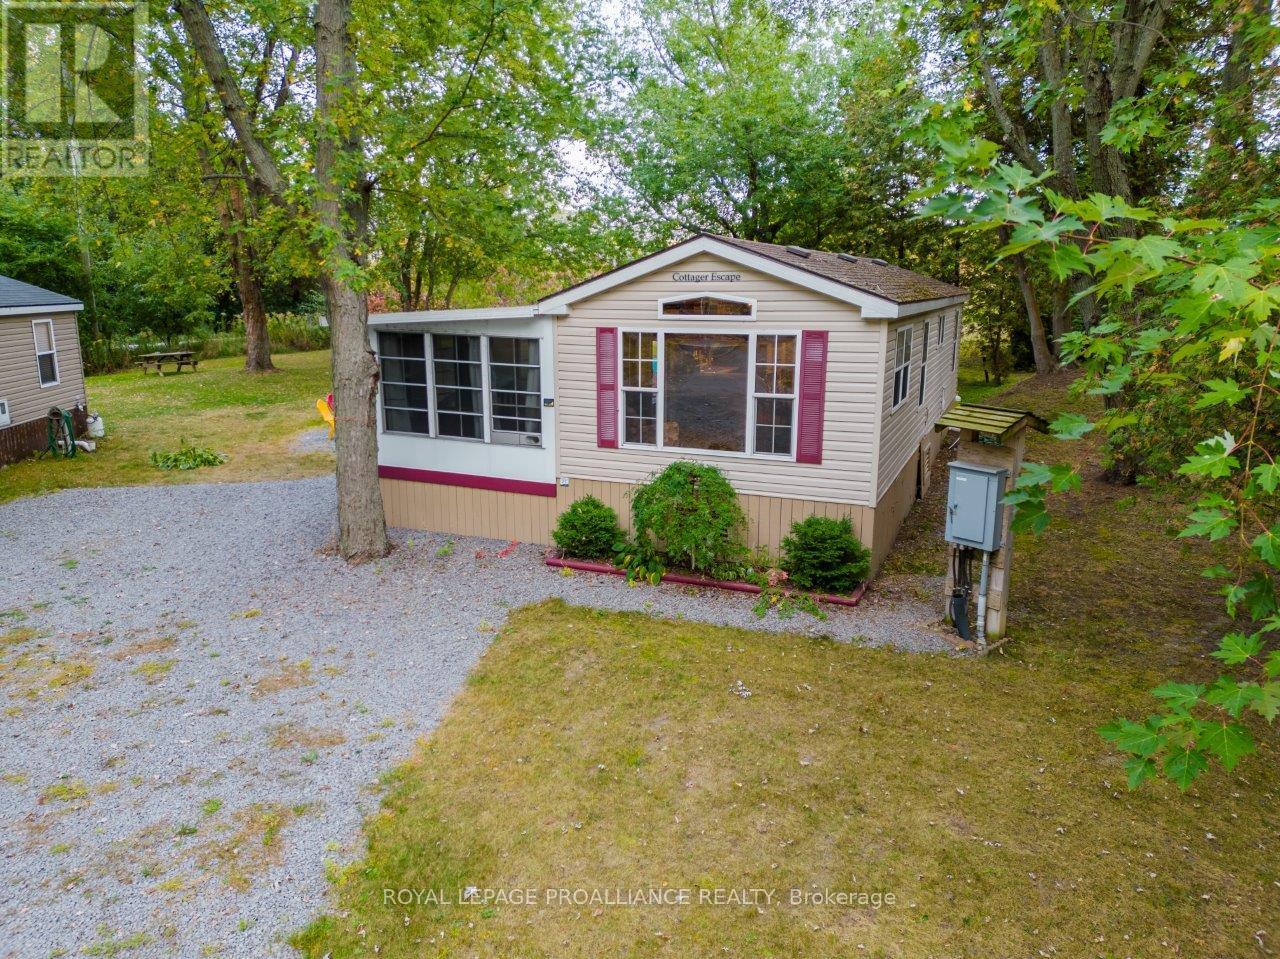 486 Cty Rd 18 - 27 Forest Grve, Prince Edward County, Ontario  K0K 2T0 - Photo 2 - X8240262